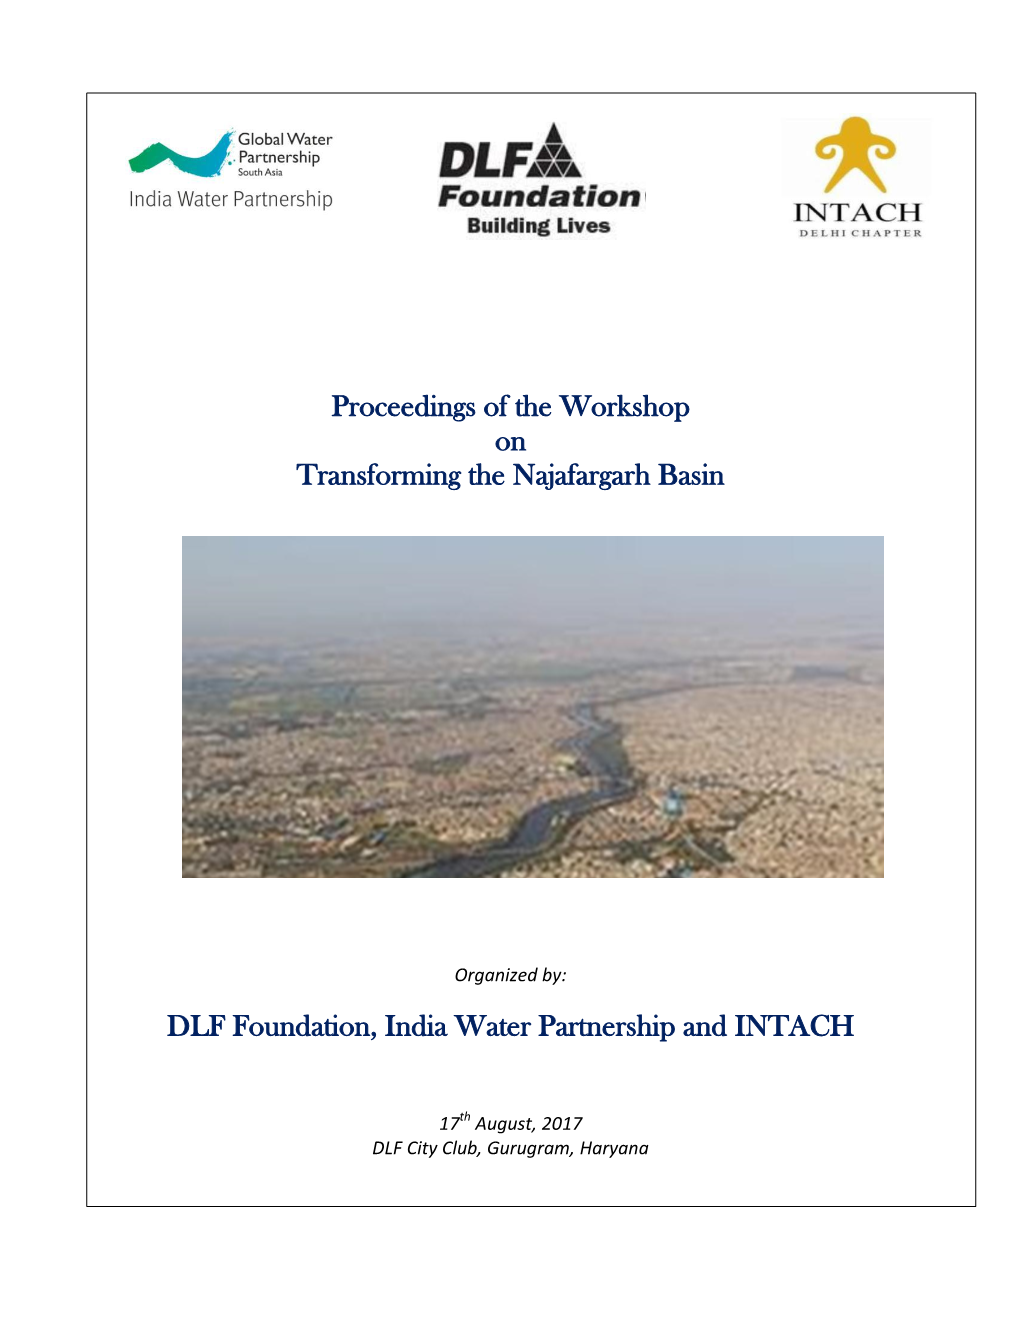 Proceedings of the Workshop on Transforming the Najafargarh Basin DLF Foundation, India Water Partnership and INTACH